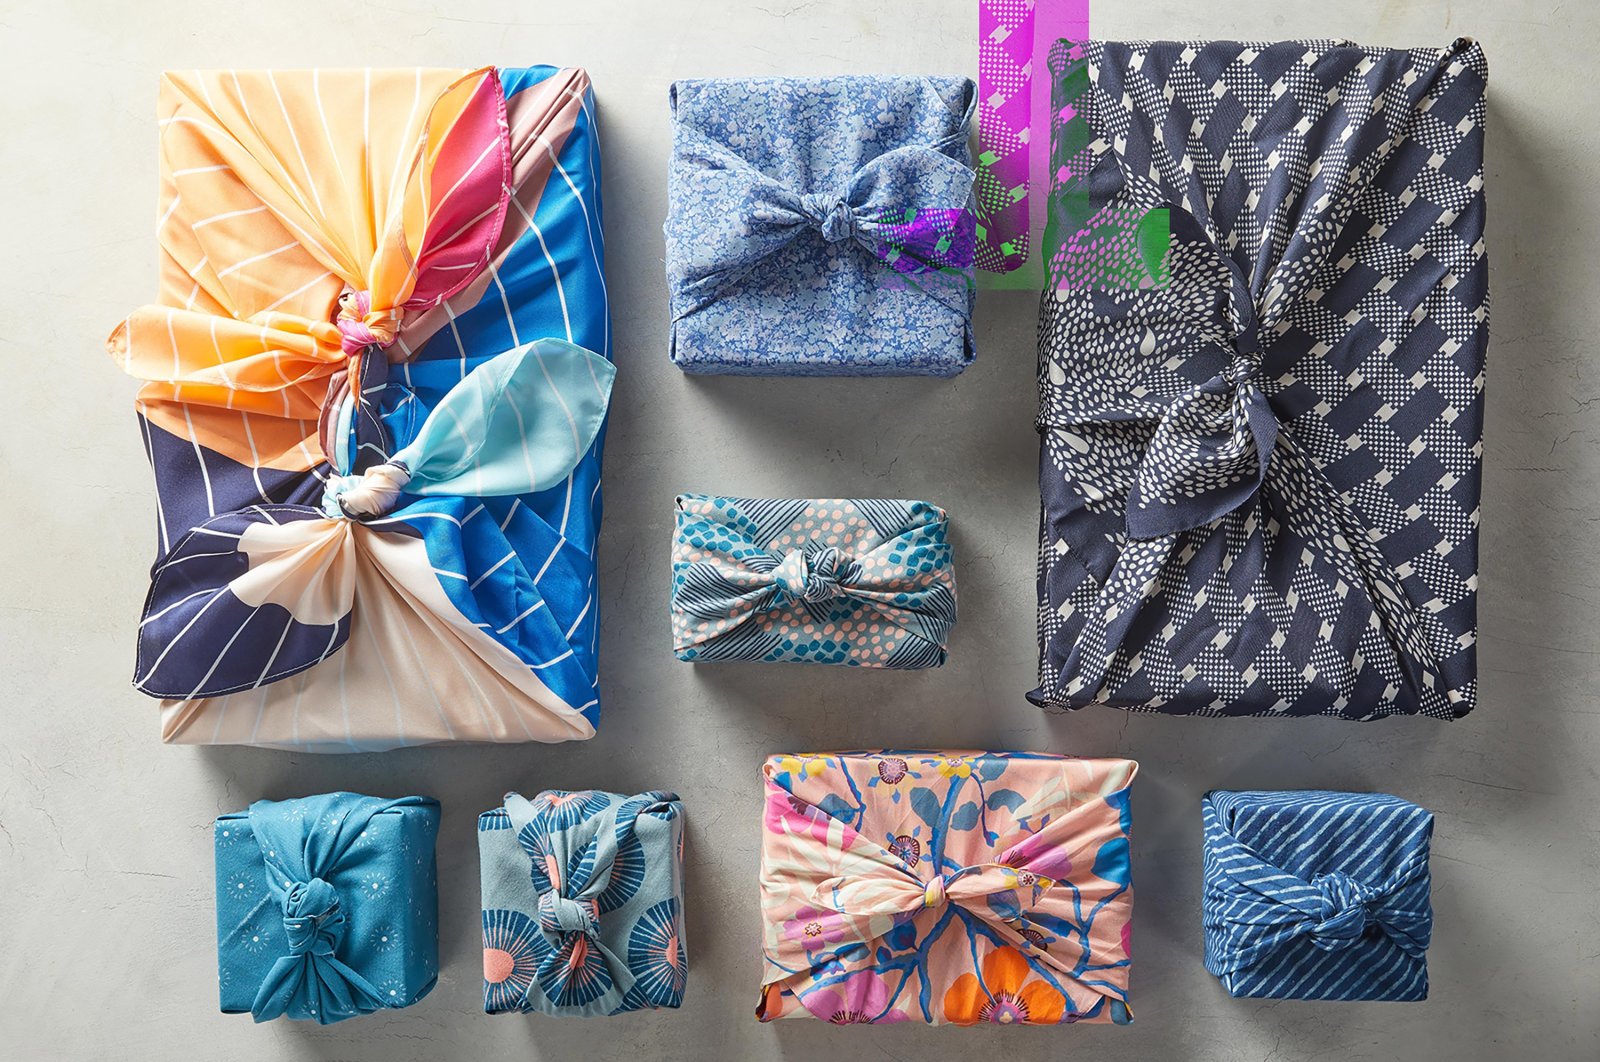 This image provided by Better Homes & Gardens shows fabric-wrapped gifts. (Jacob Fox/Better Homes & Gardens via AP)